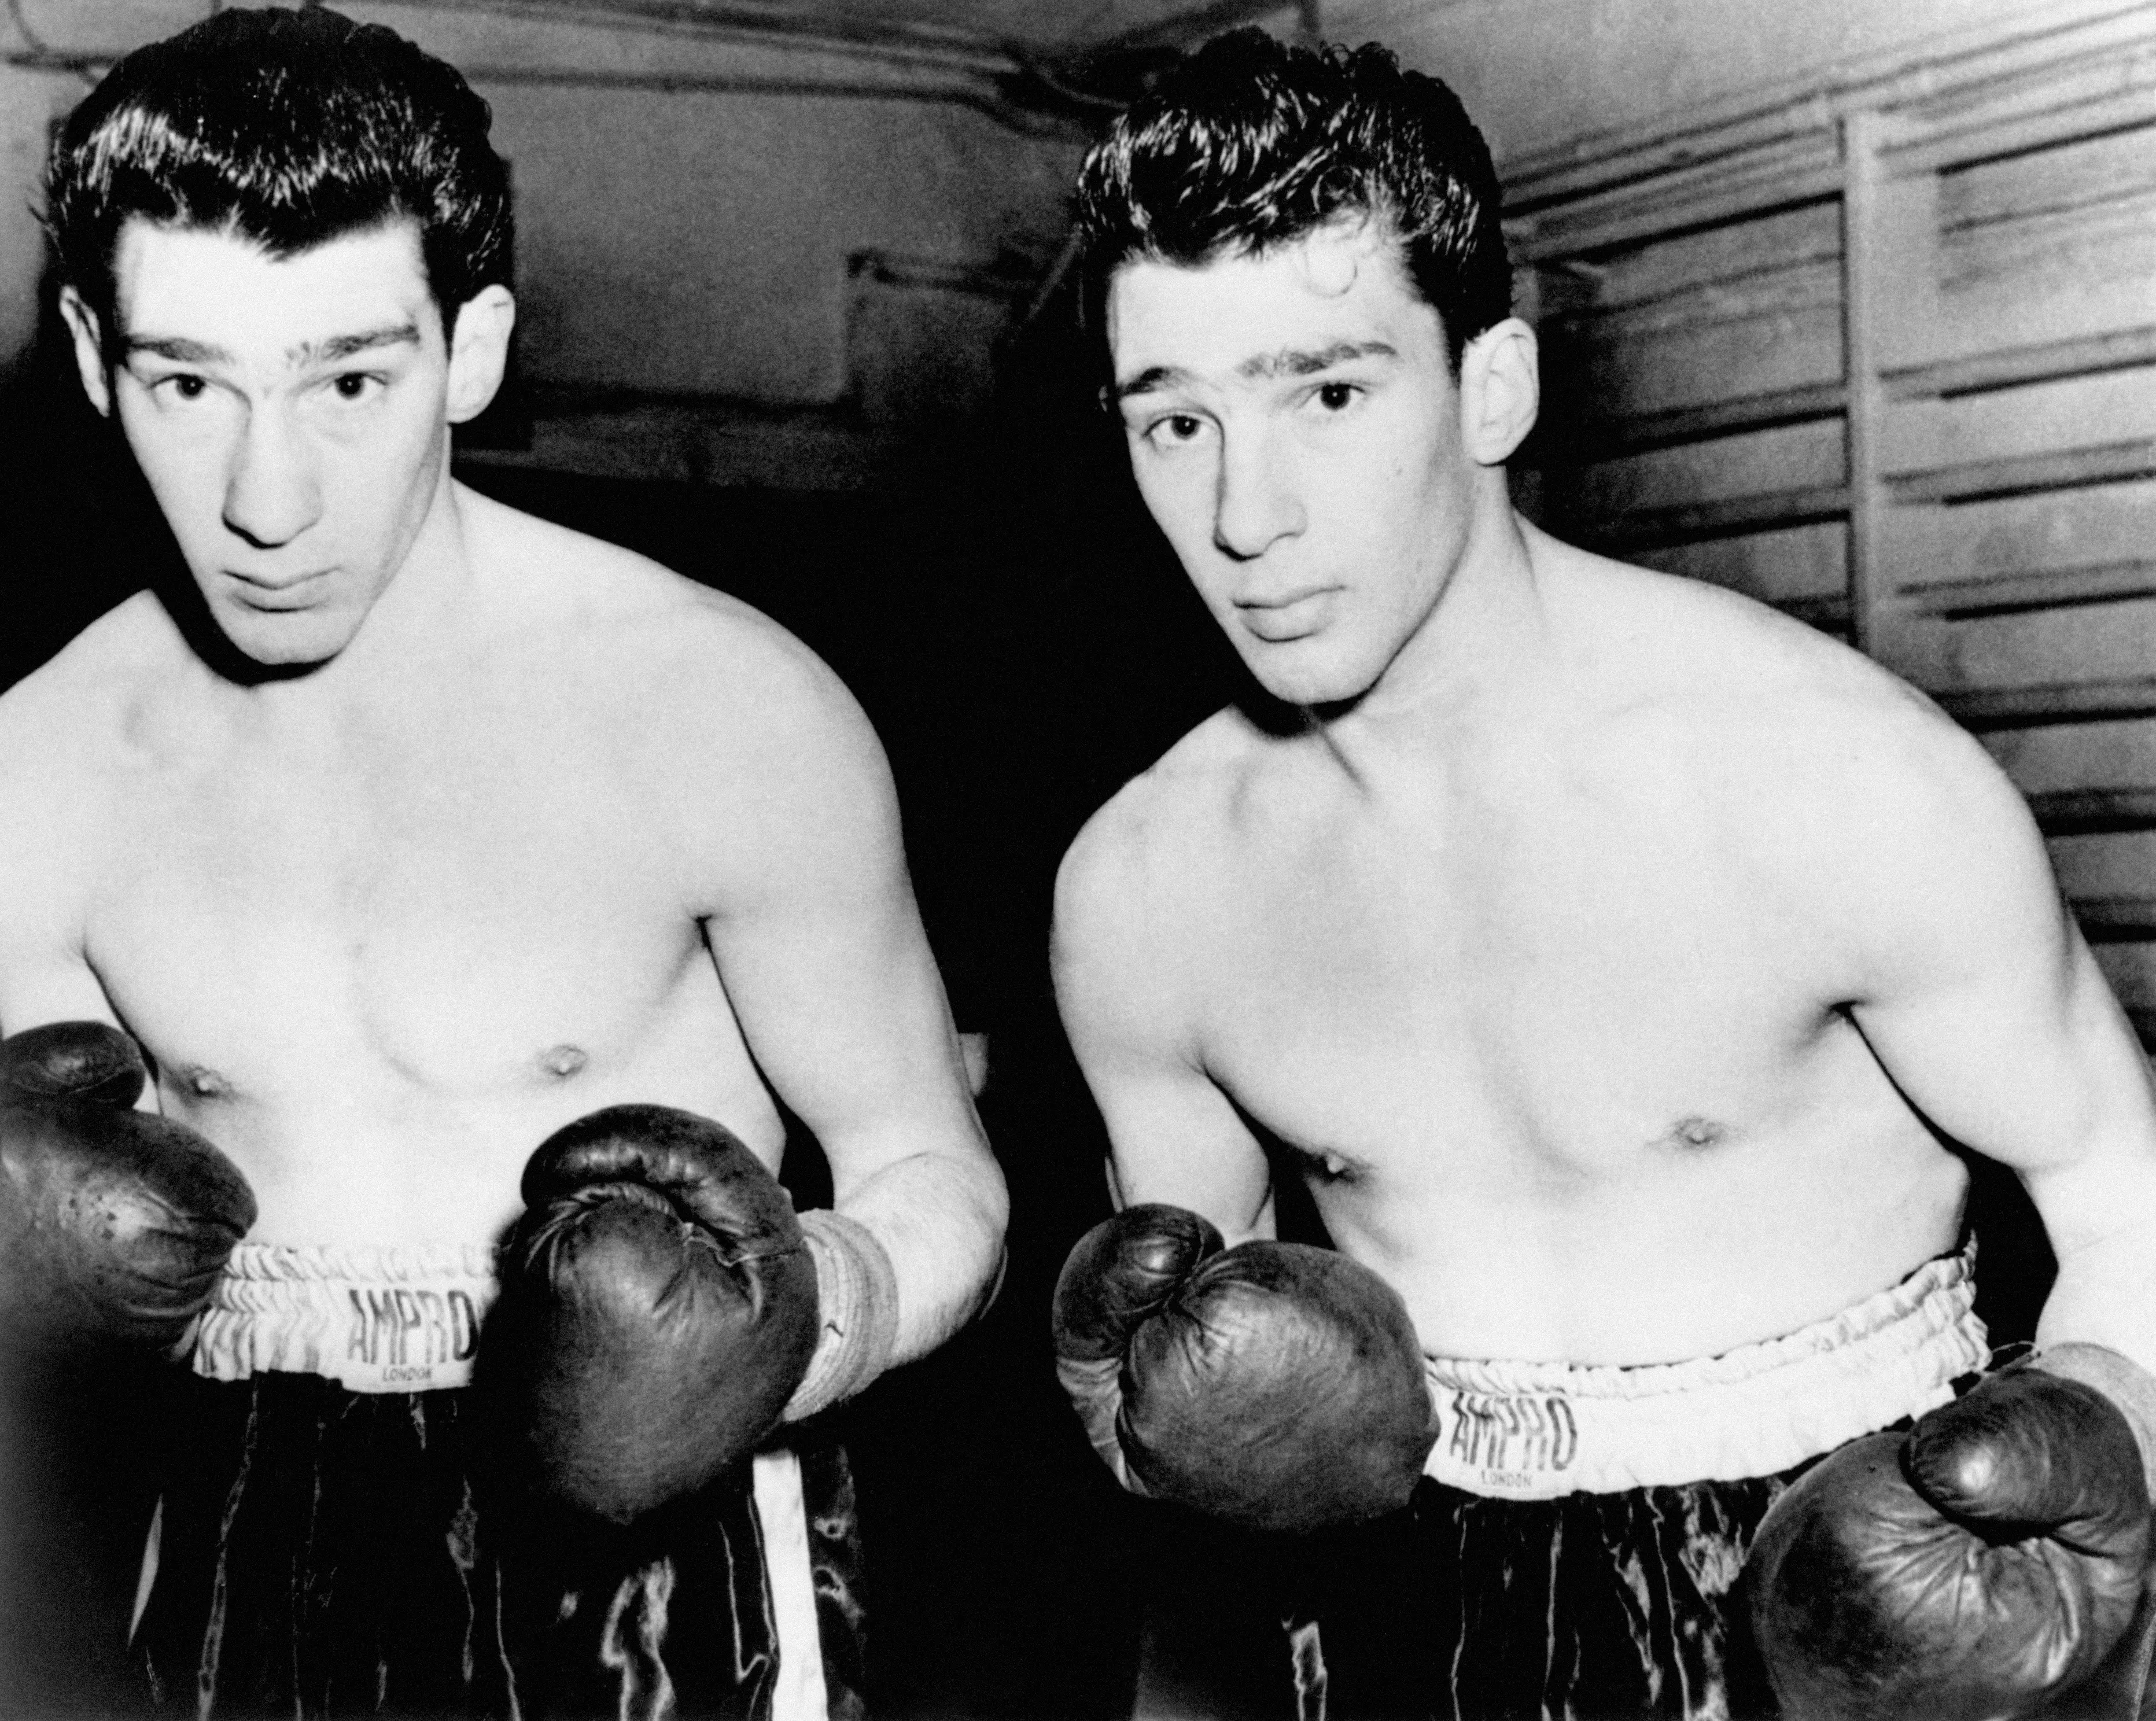 The Kray twins were prominent figures in 1950s and 60s (